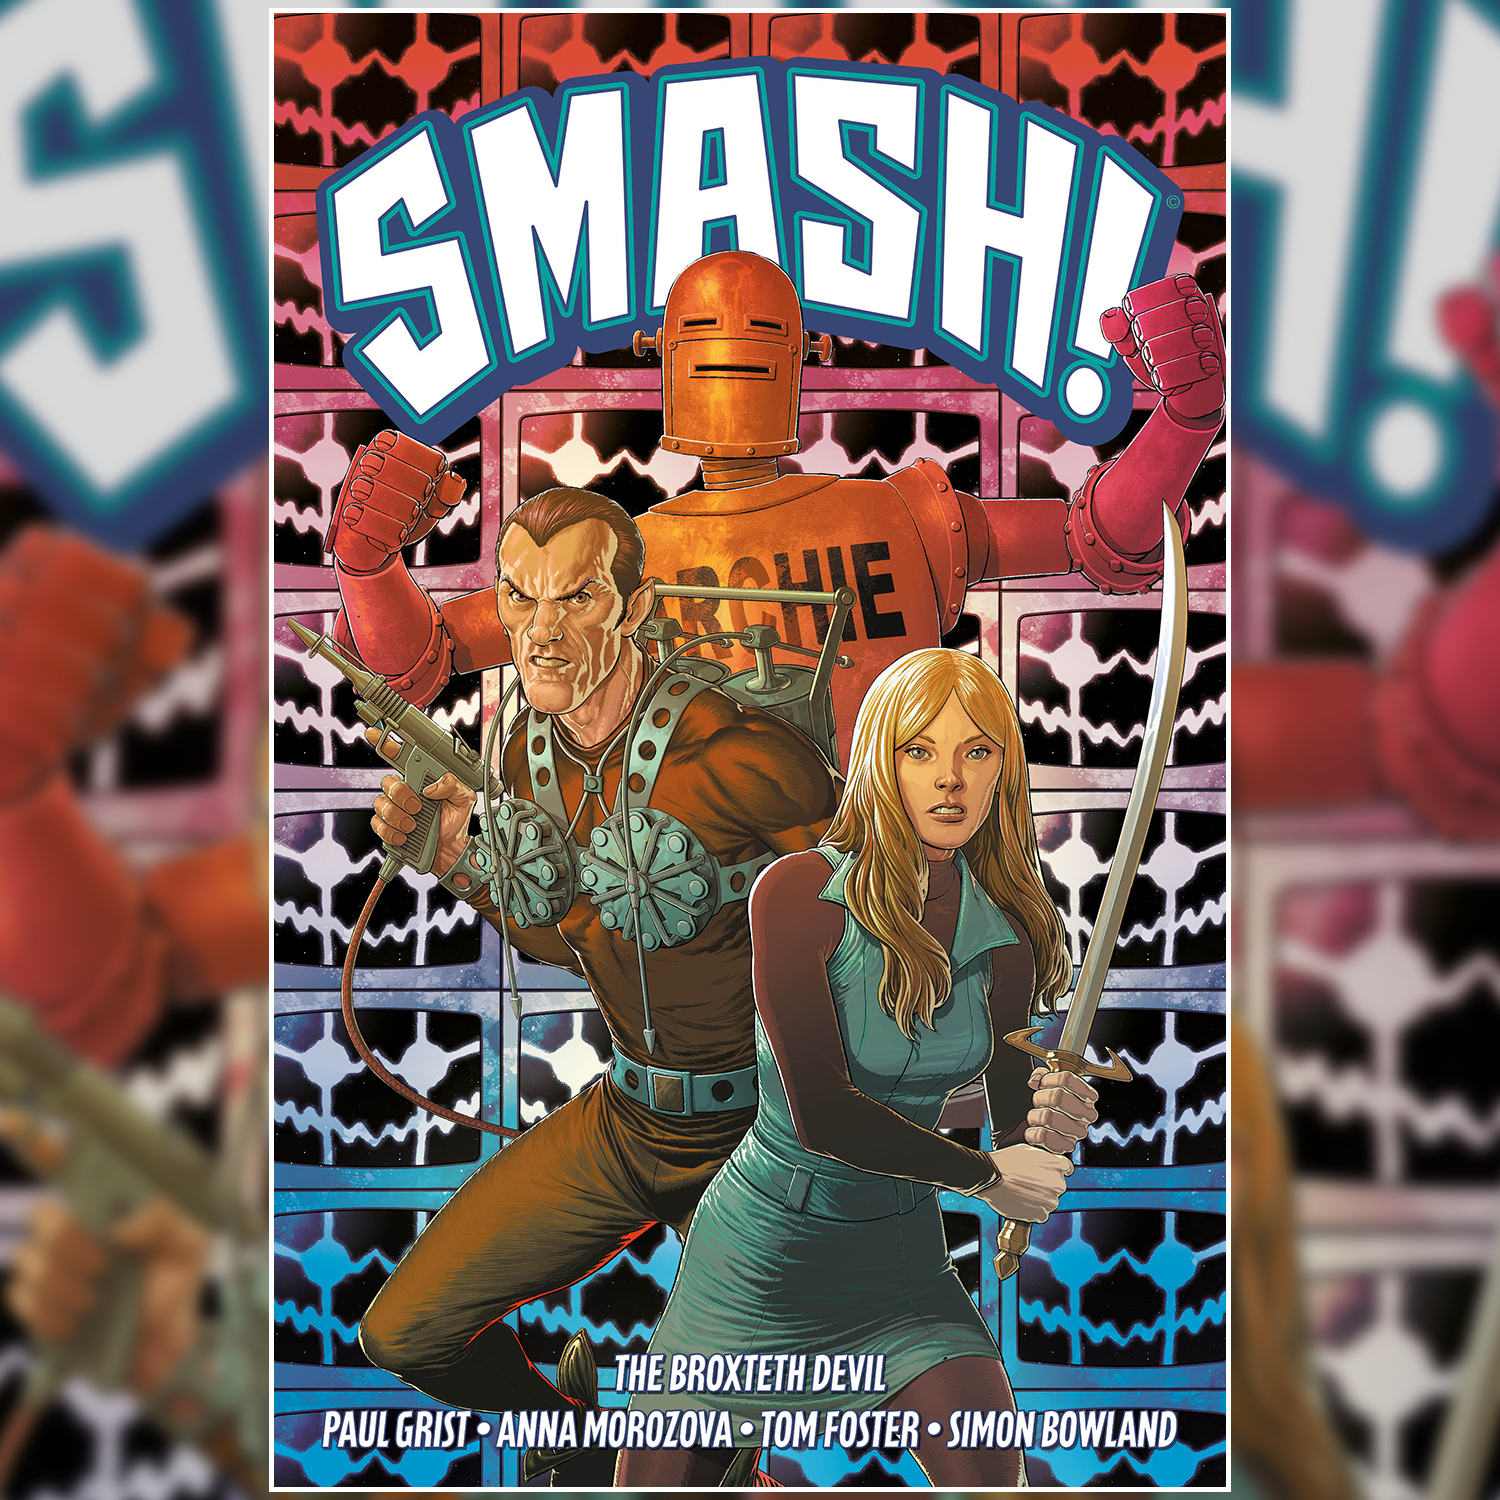 Classic Comics Characters Collide – Pre-Order Smash!: The Broxteth Devil today